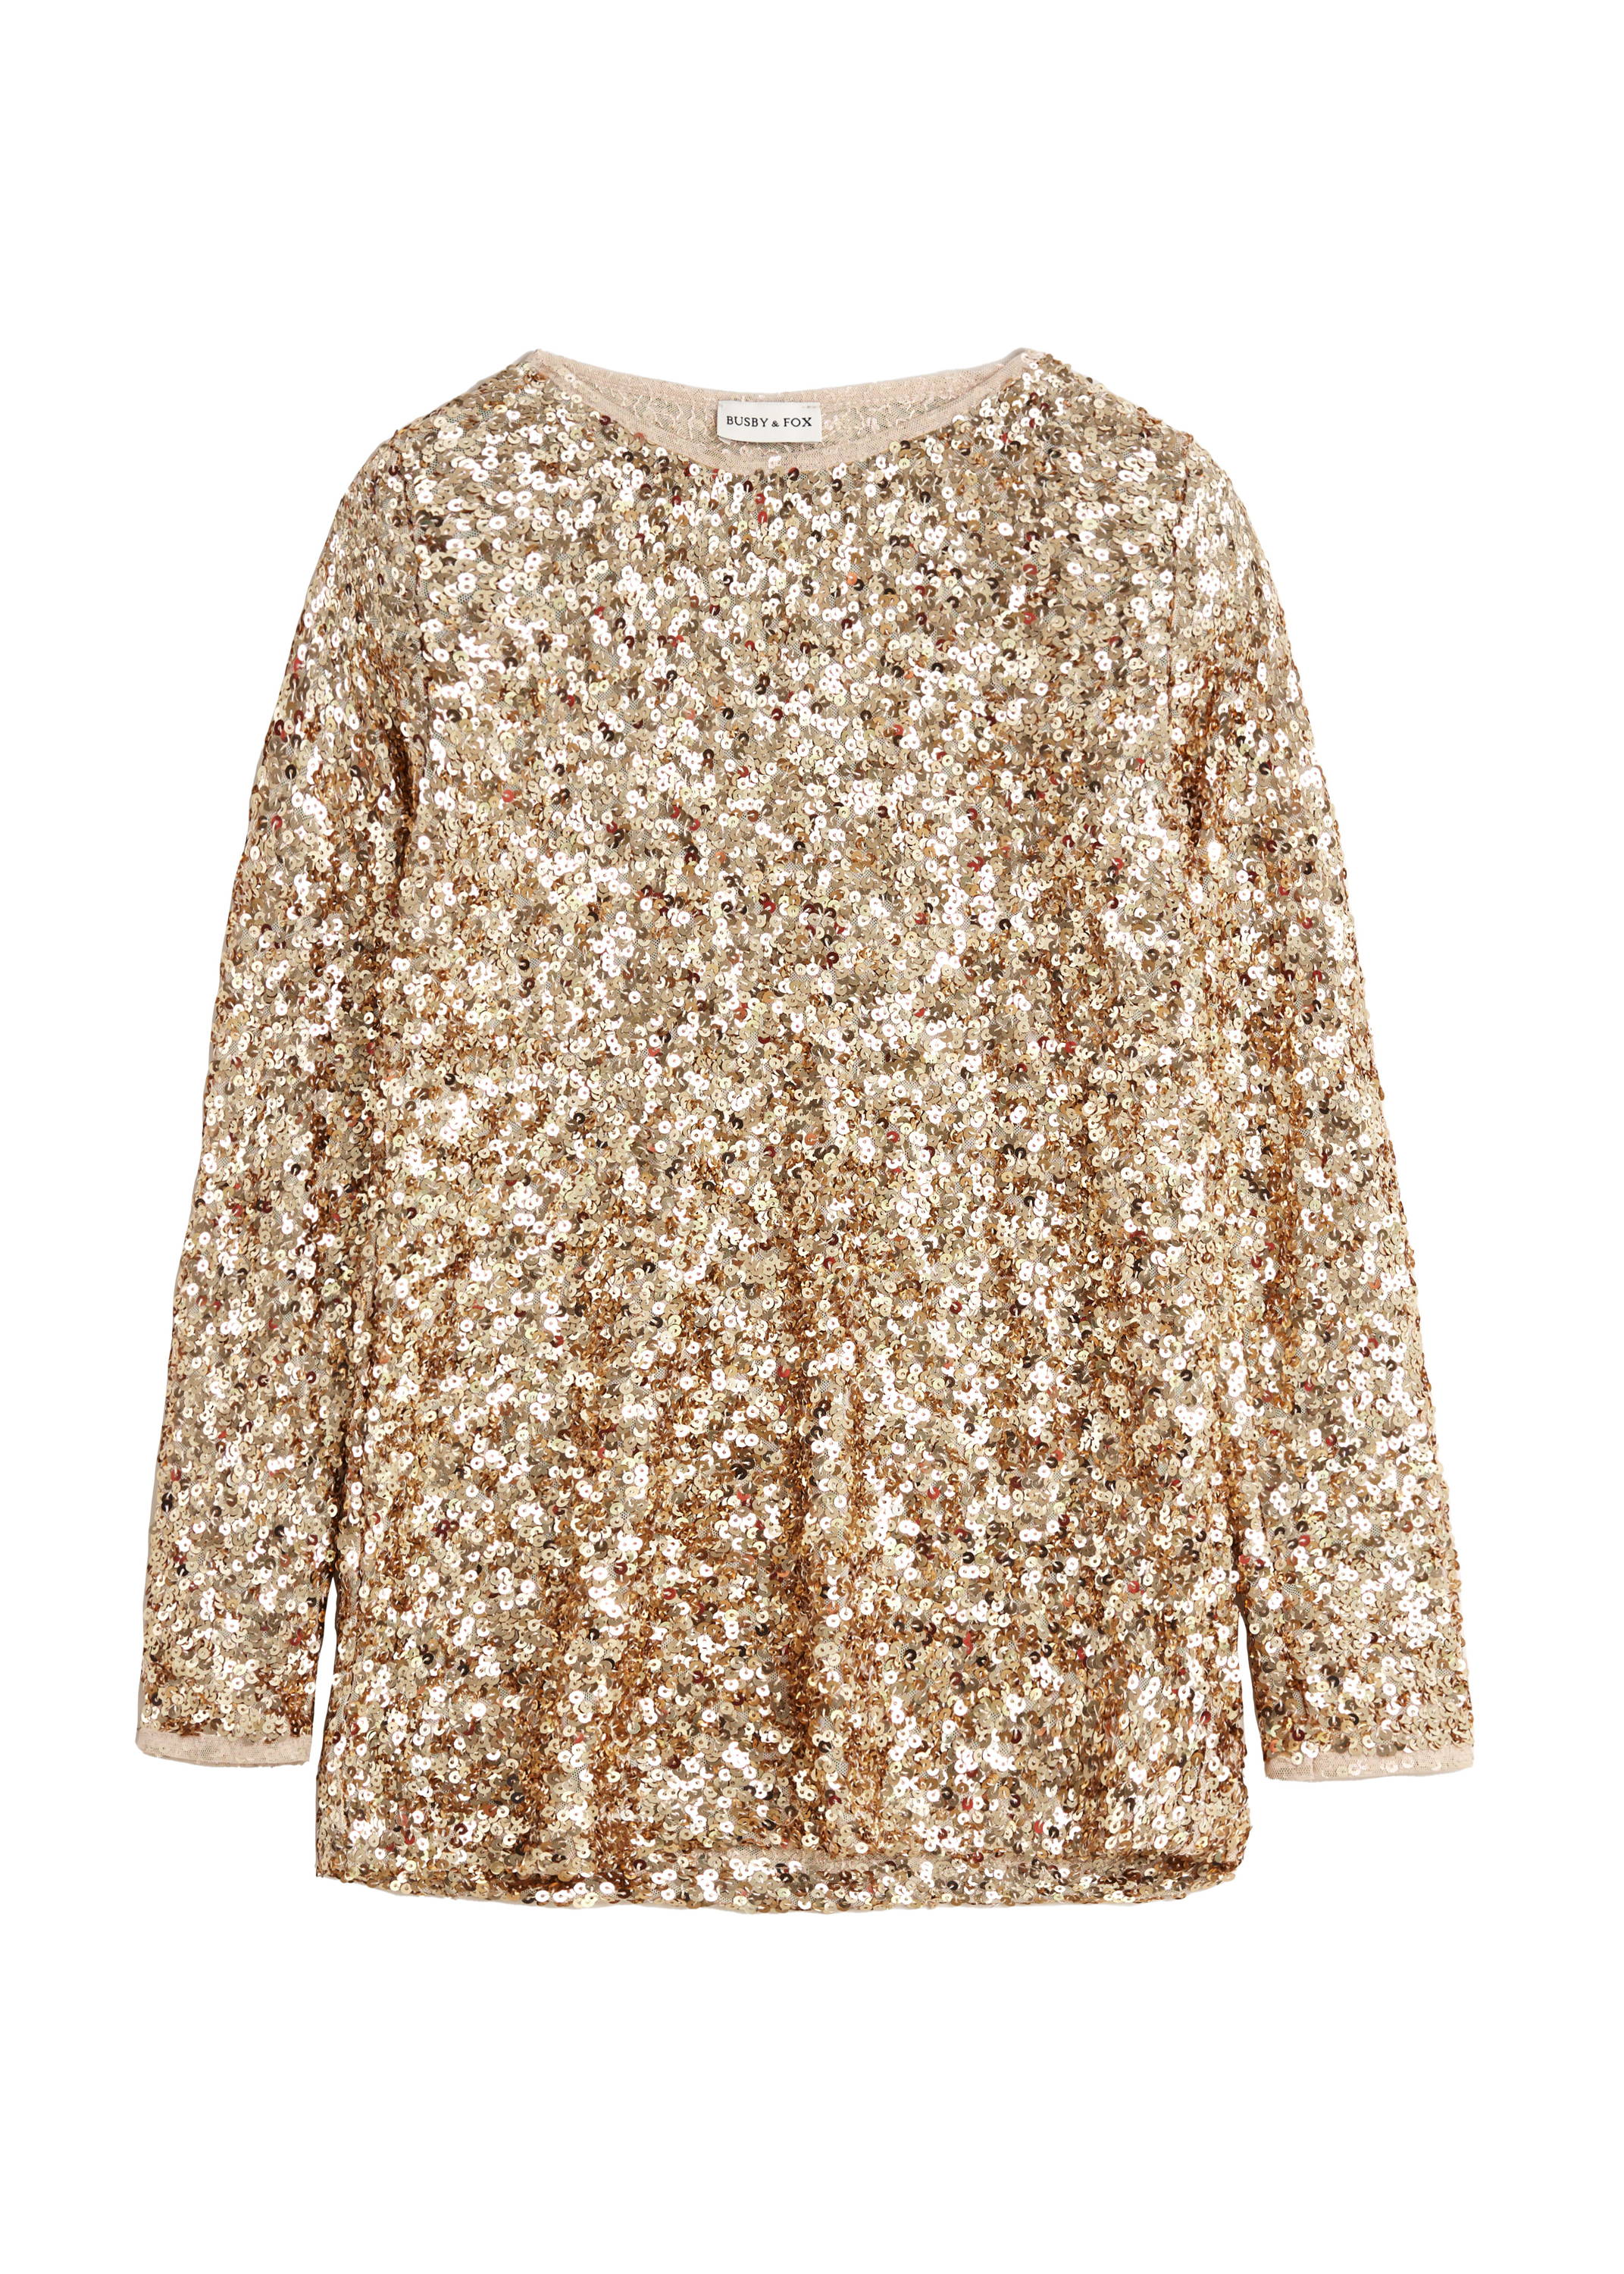 A long sleeved top with gold sequins